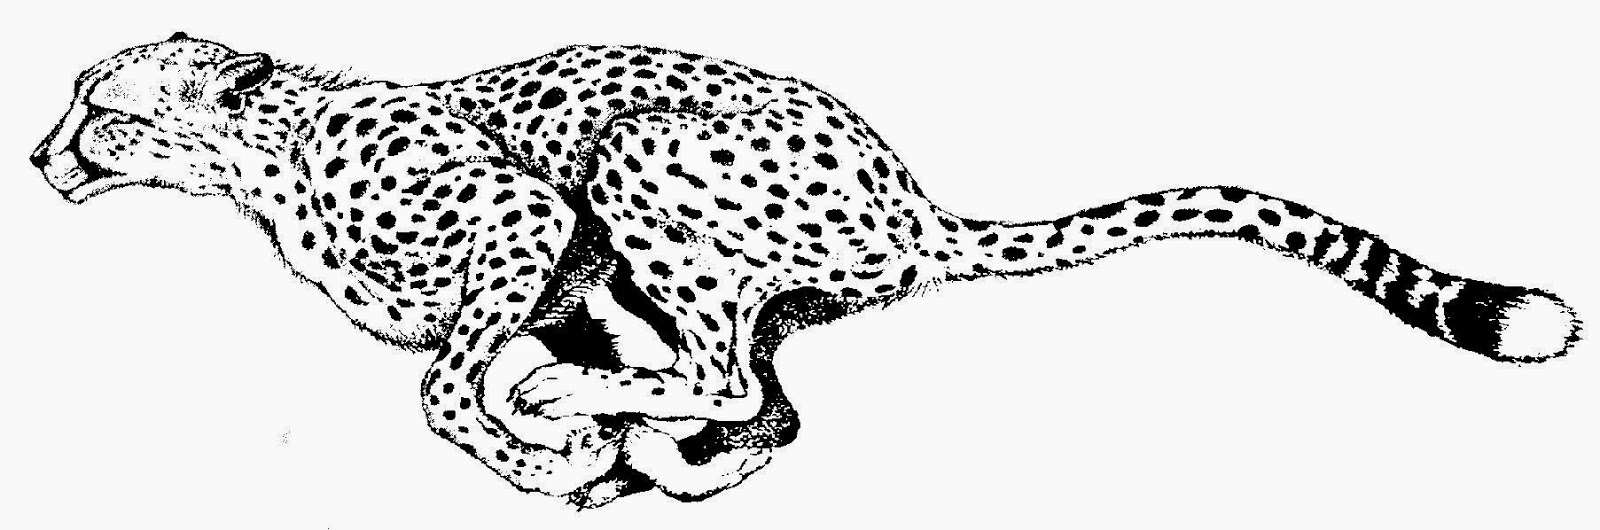 Download Coloring Pages Of A Cheetah Animal Or Print Coloring